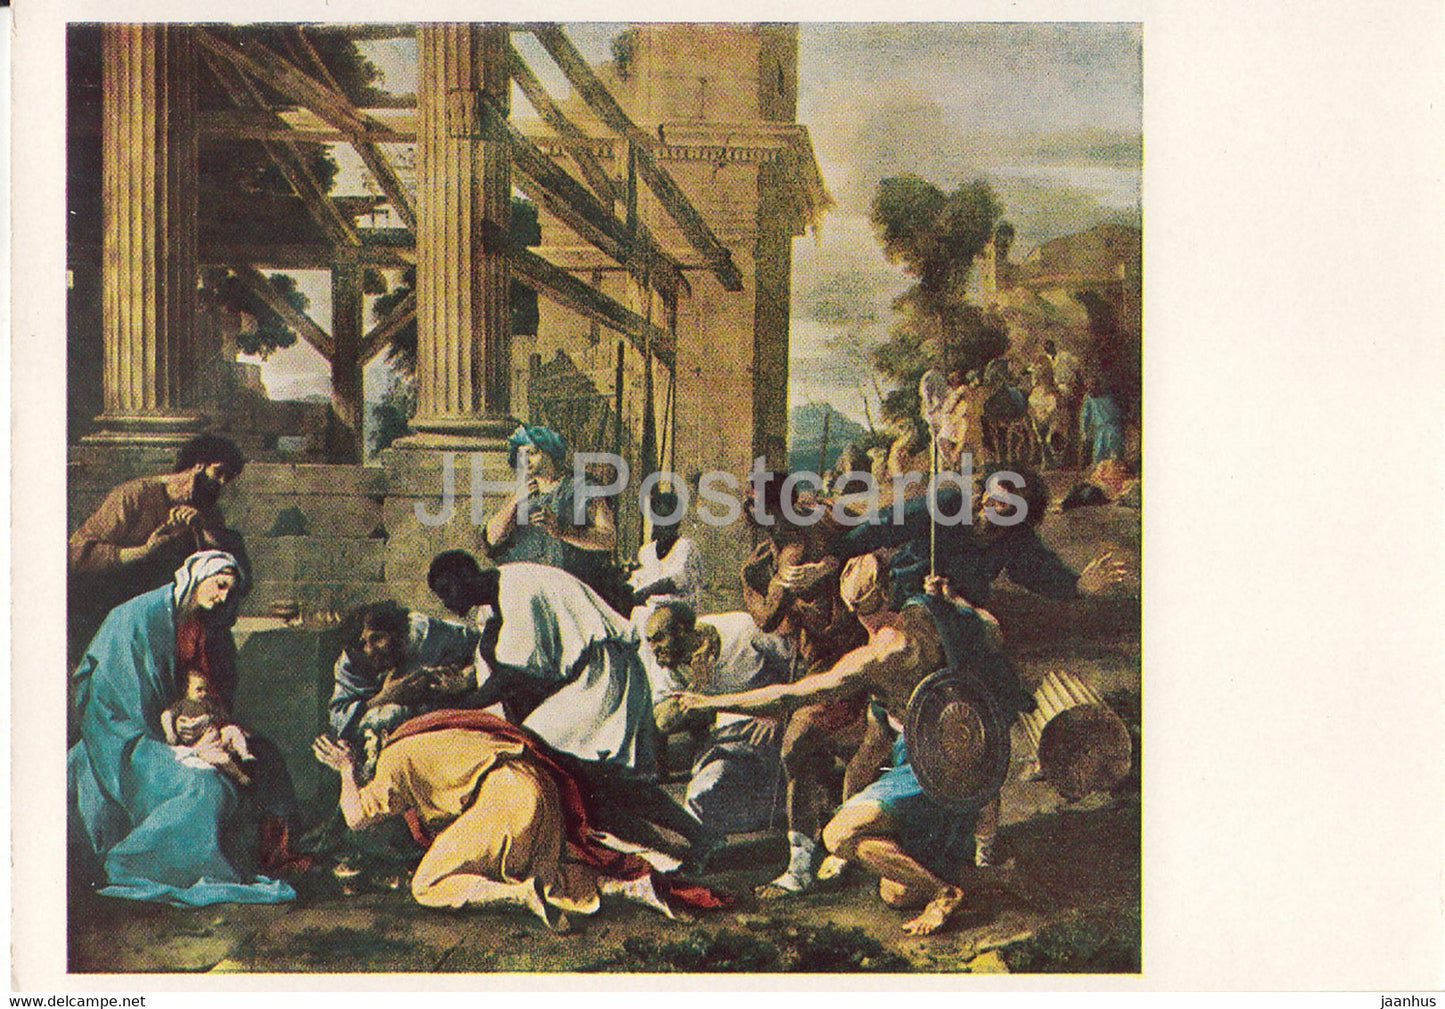 painting by Nicolas Poussin - Adoration of Magi - French art - 1966 - Russia USSR - unused - JH Postcards